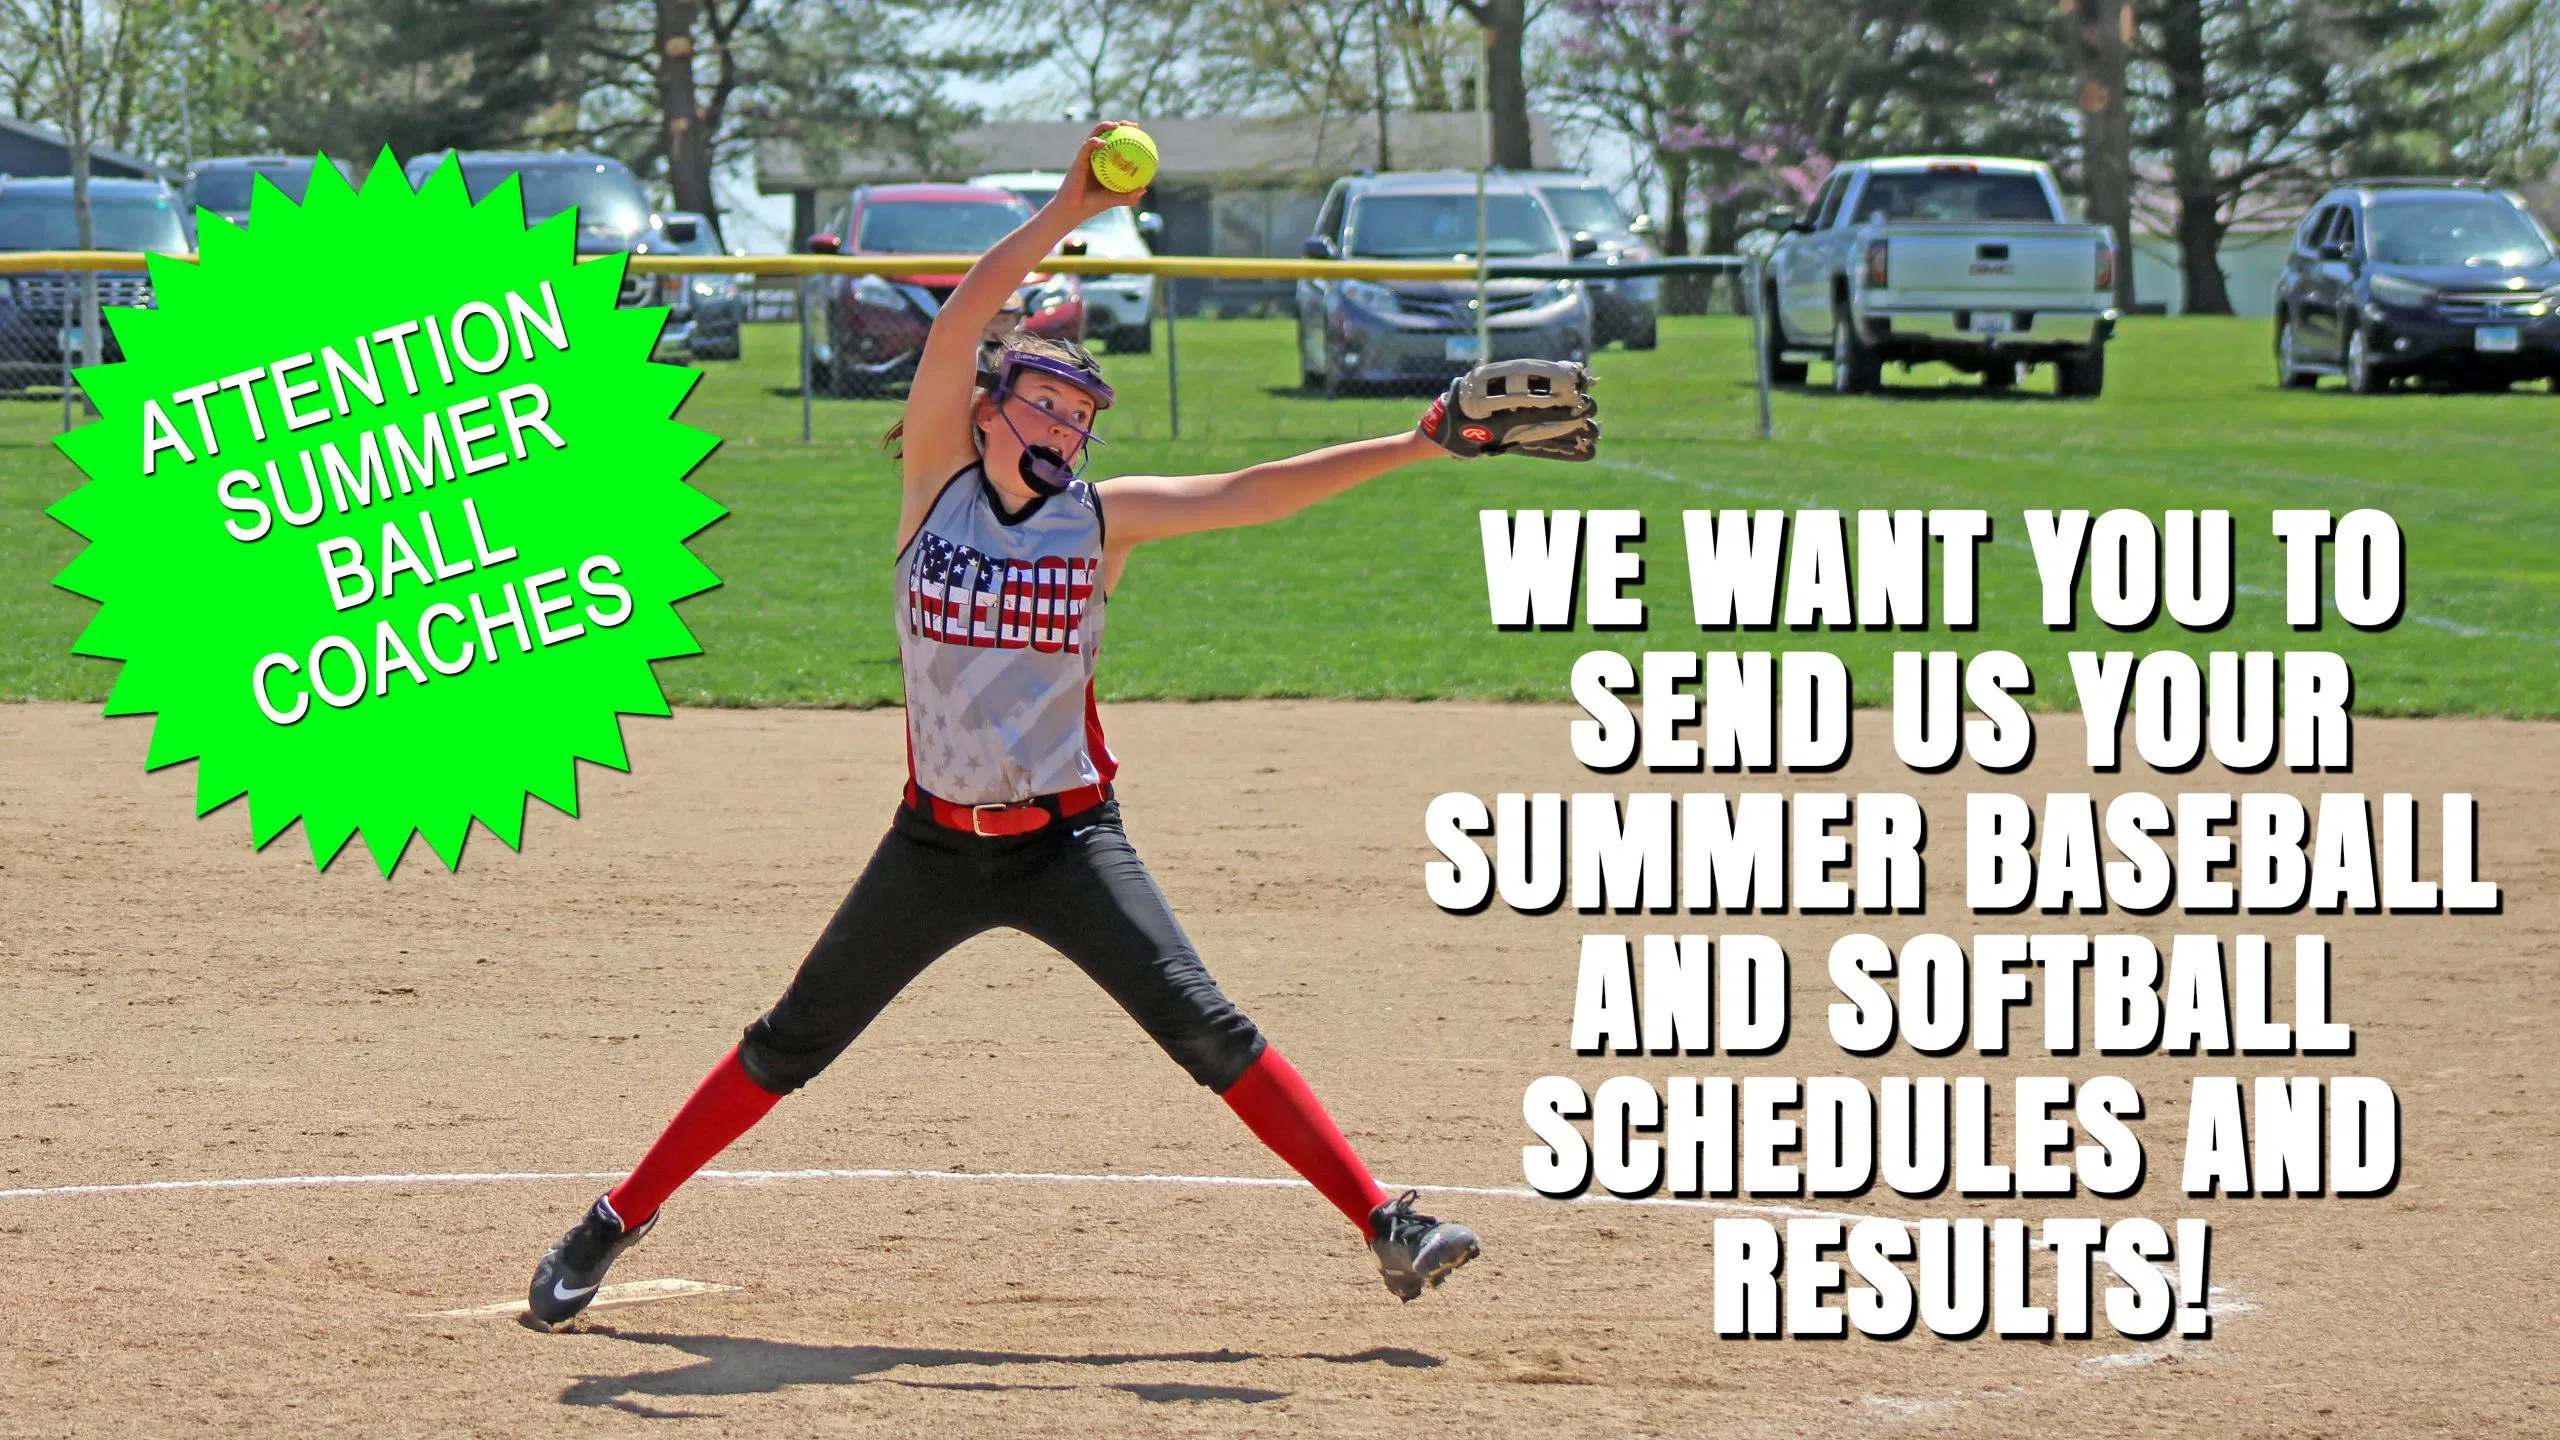 We are looking for Summer Ball Schedules & Results